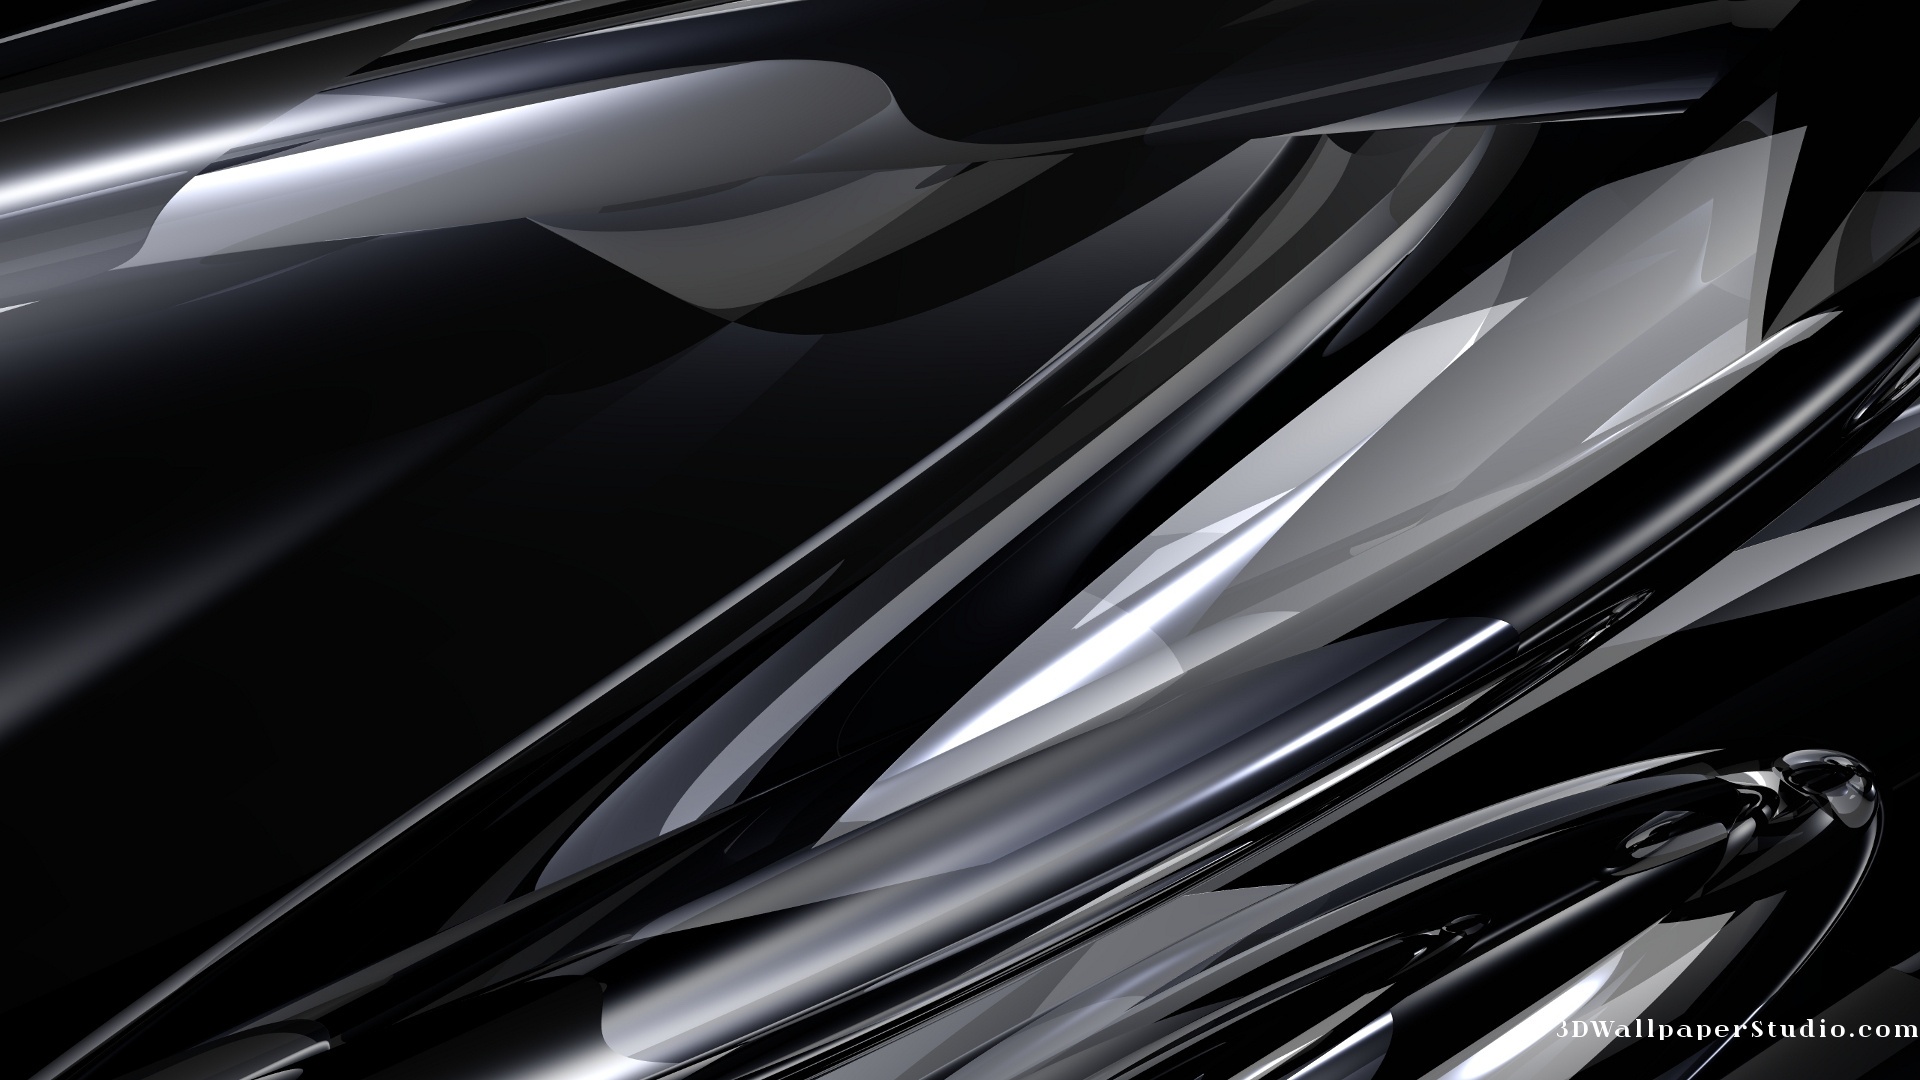 Abstract Pictures Chrome Wallpaper